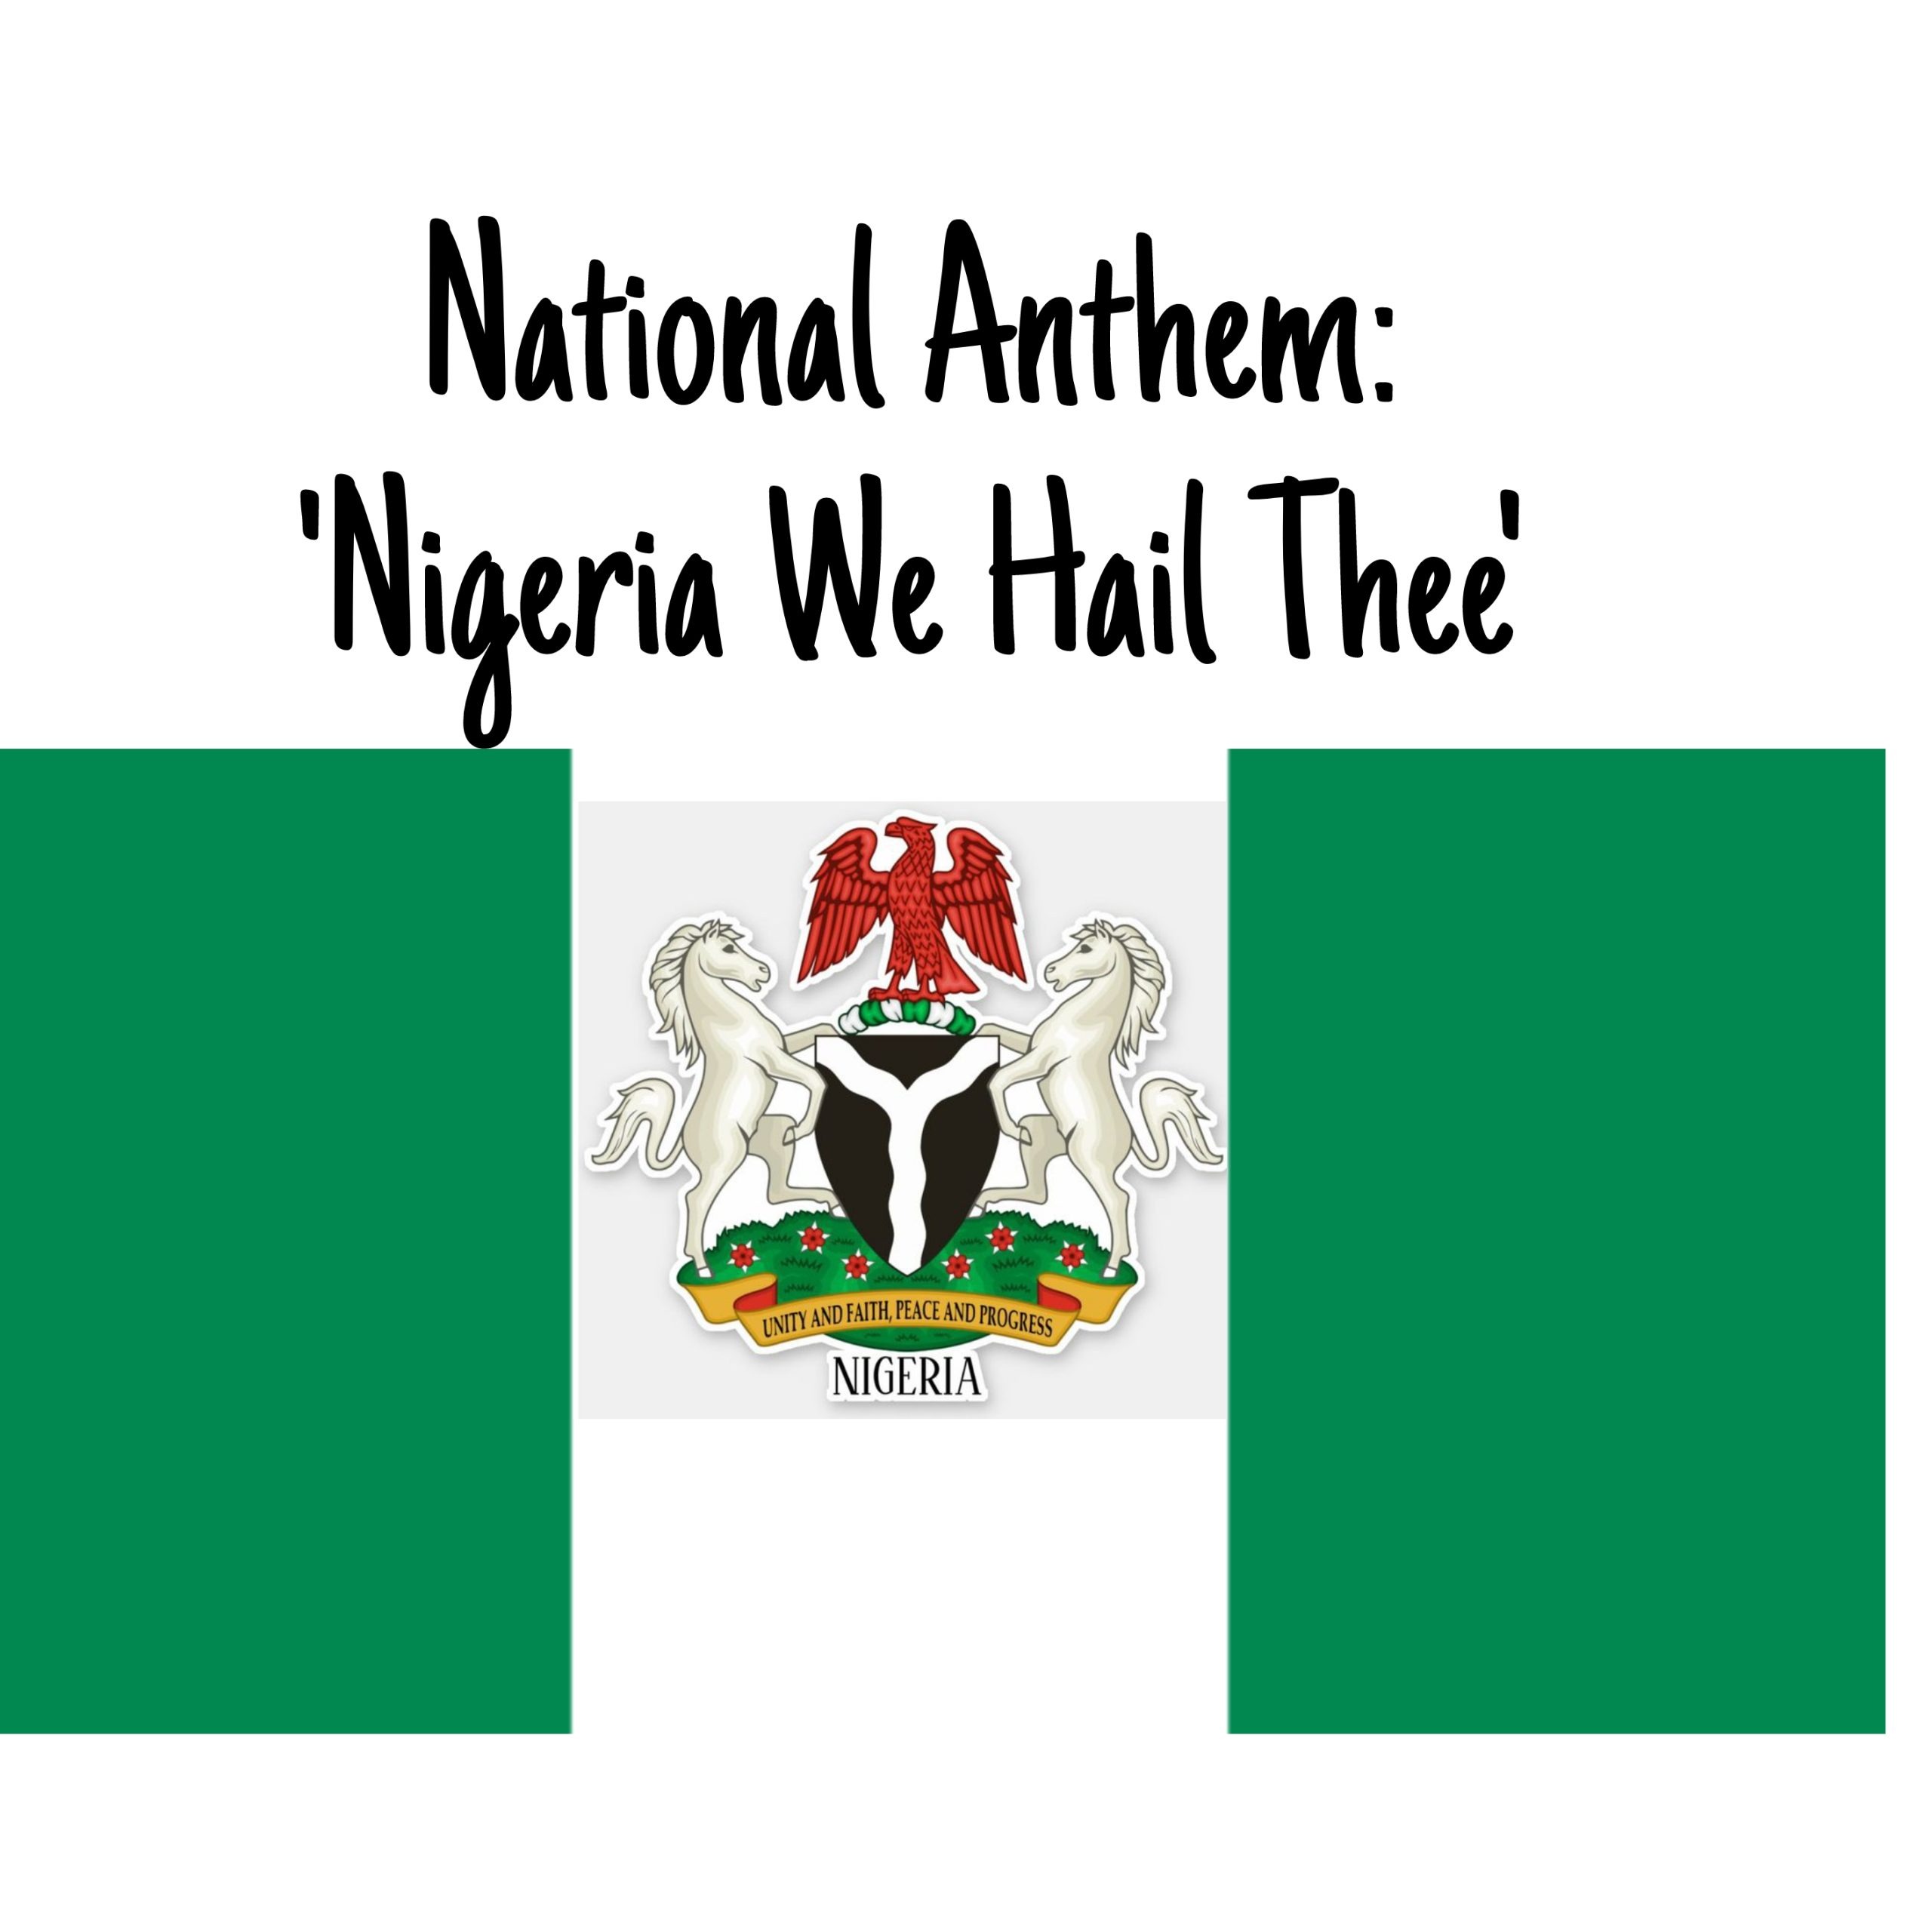 Old National Anthem: Nigerian Politicians Still Tied To Colonial Masters’ Apron Strings - Nnimmo Bassey